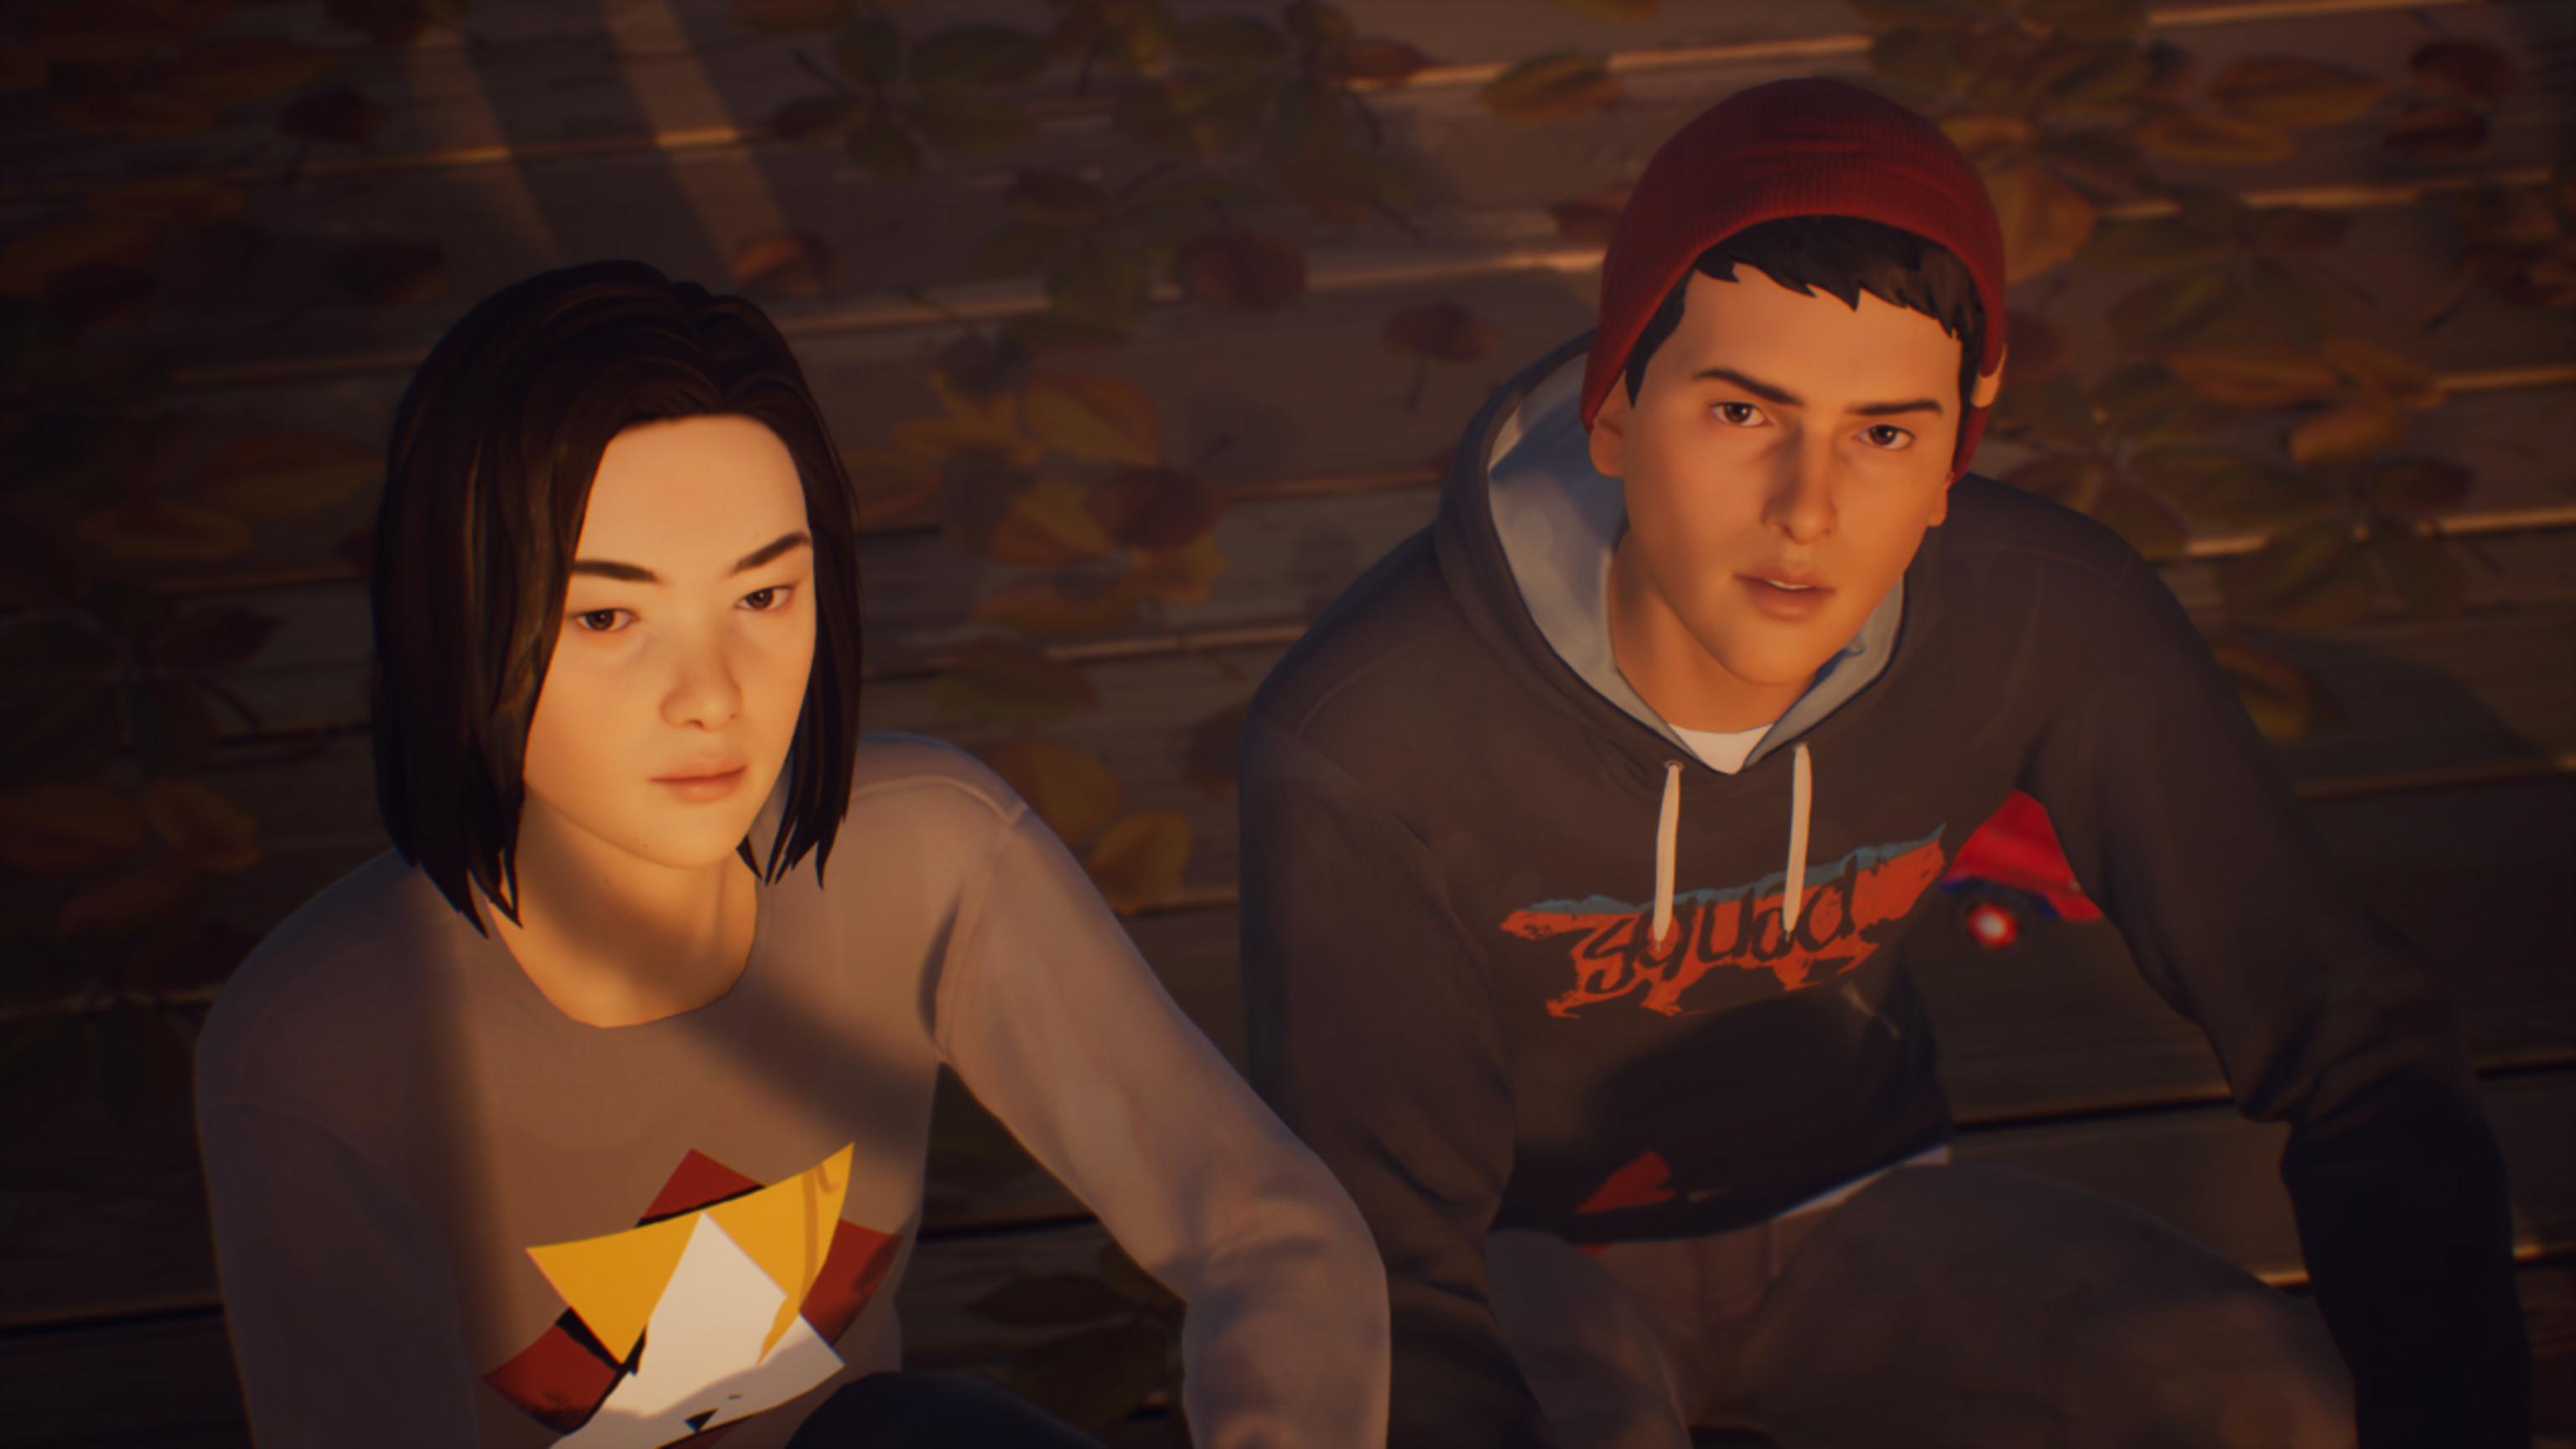 Action, Action & Adventure, adventure, Deck Nine Games, DONTNOD Entertainment, episodic, Life is Strange, Life Is Strange 2, PS4, PS4 Review, Square Enix, Story Driven, Story Rich, Xbox One, Xbox One Review